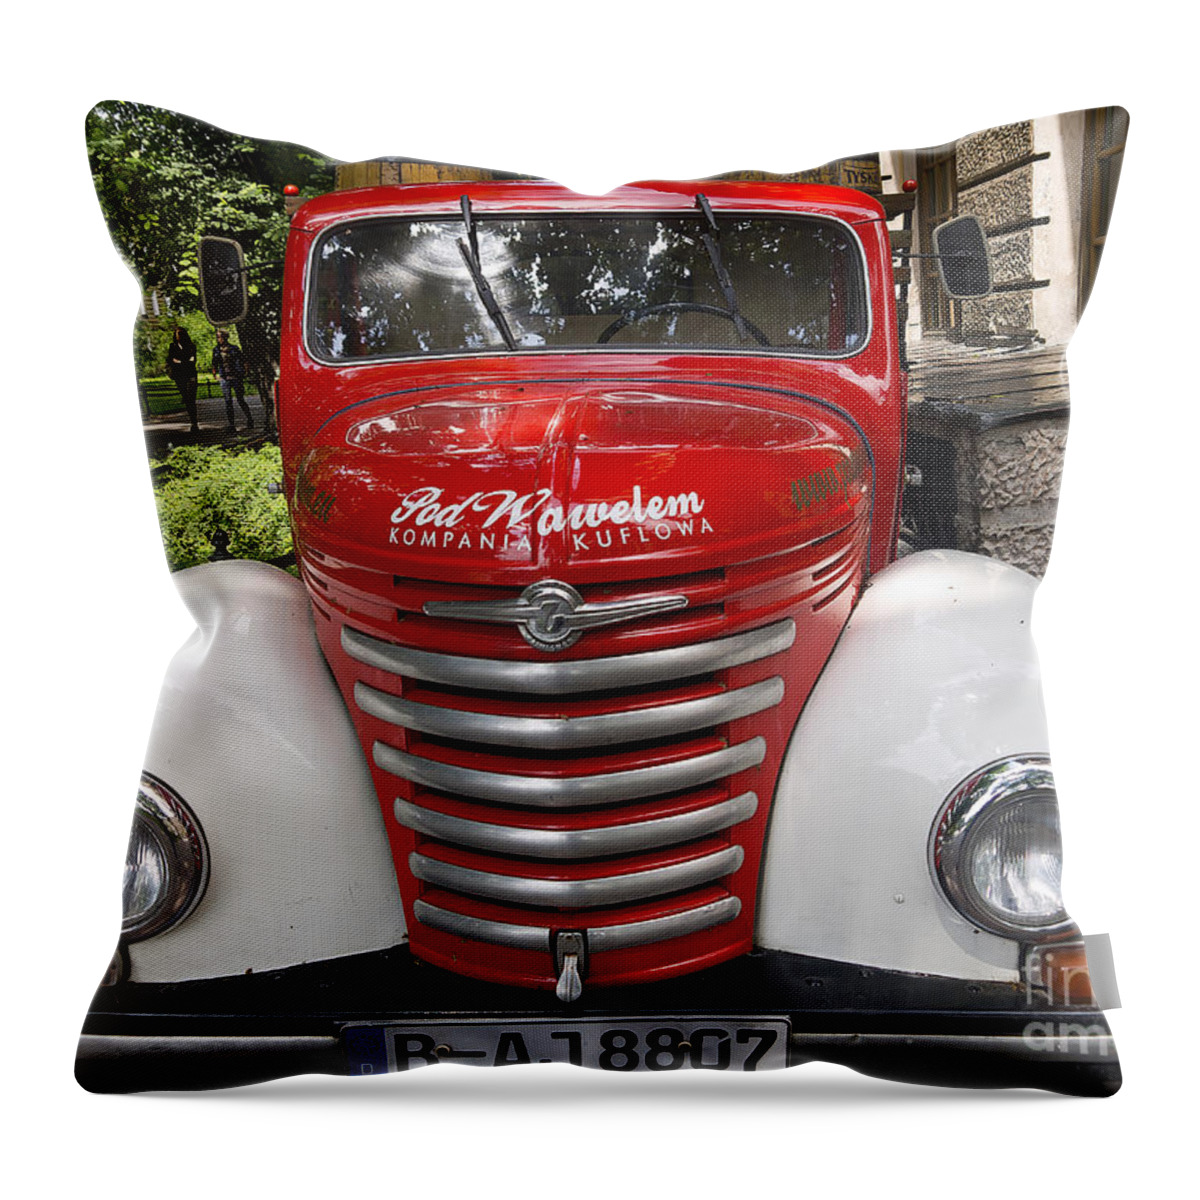 Krakow Throw Pillow featuring the photograph Beer Truck by Brenda Kean